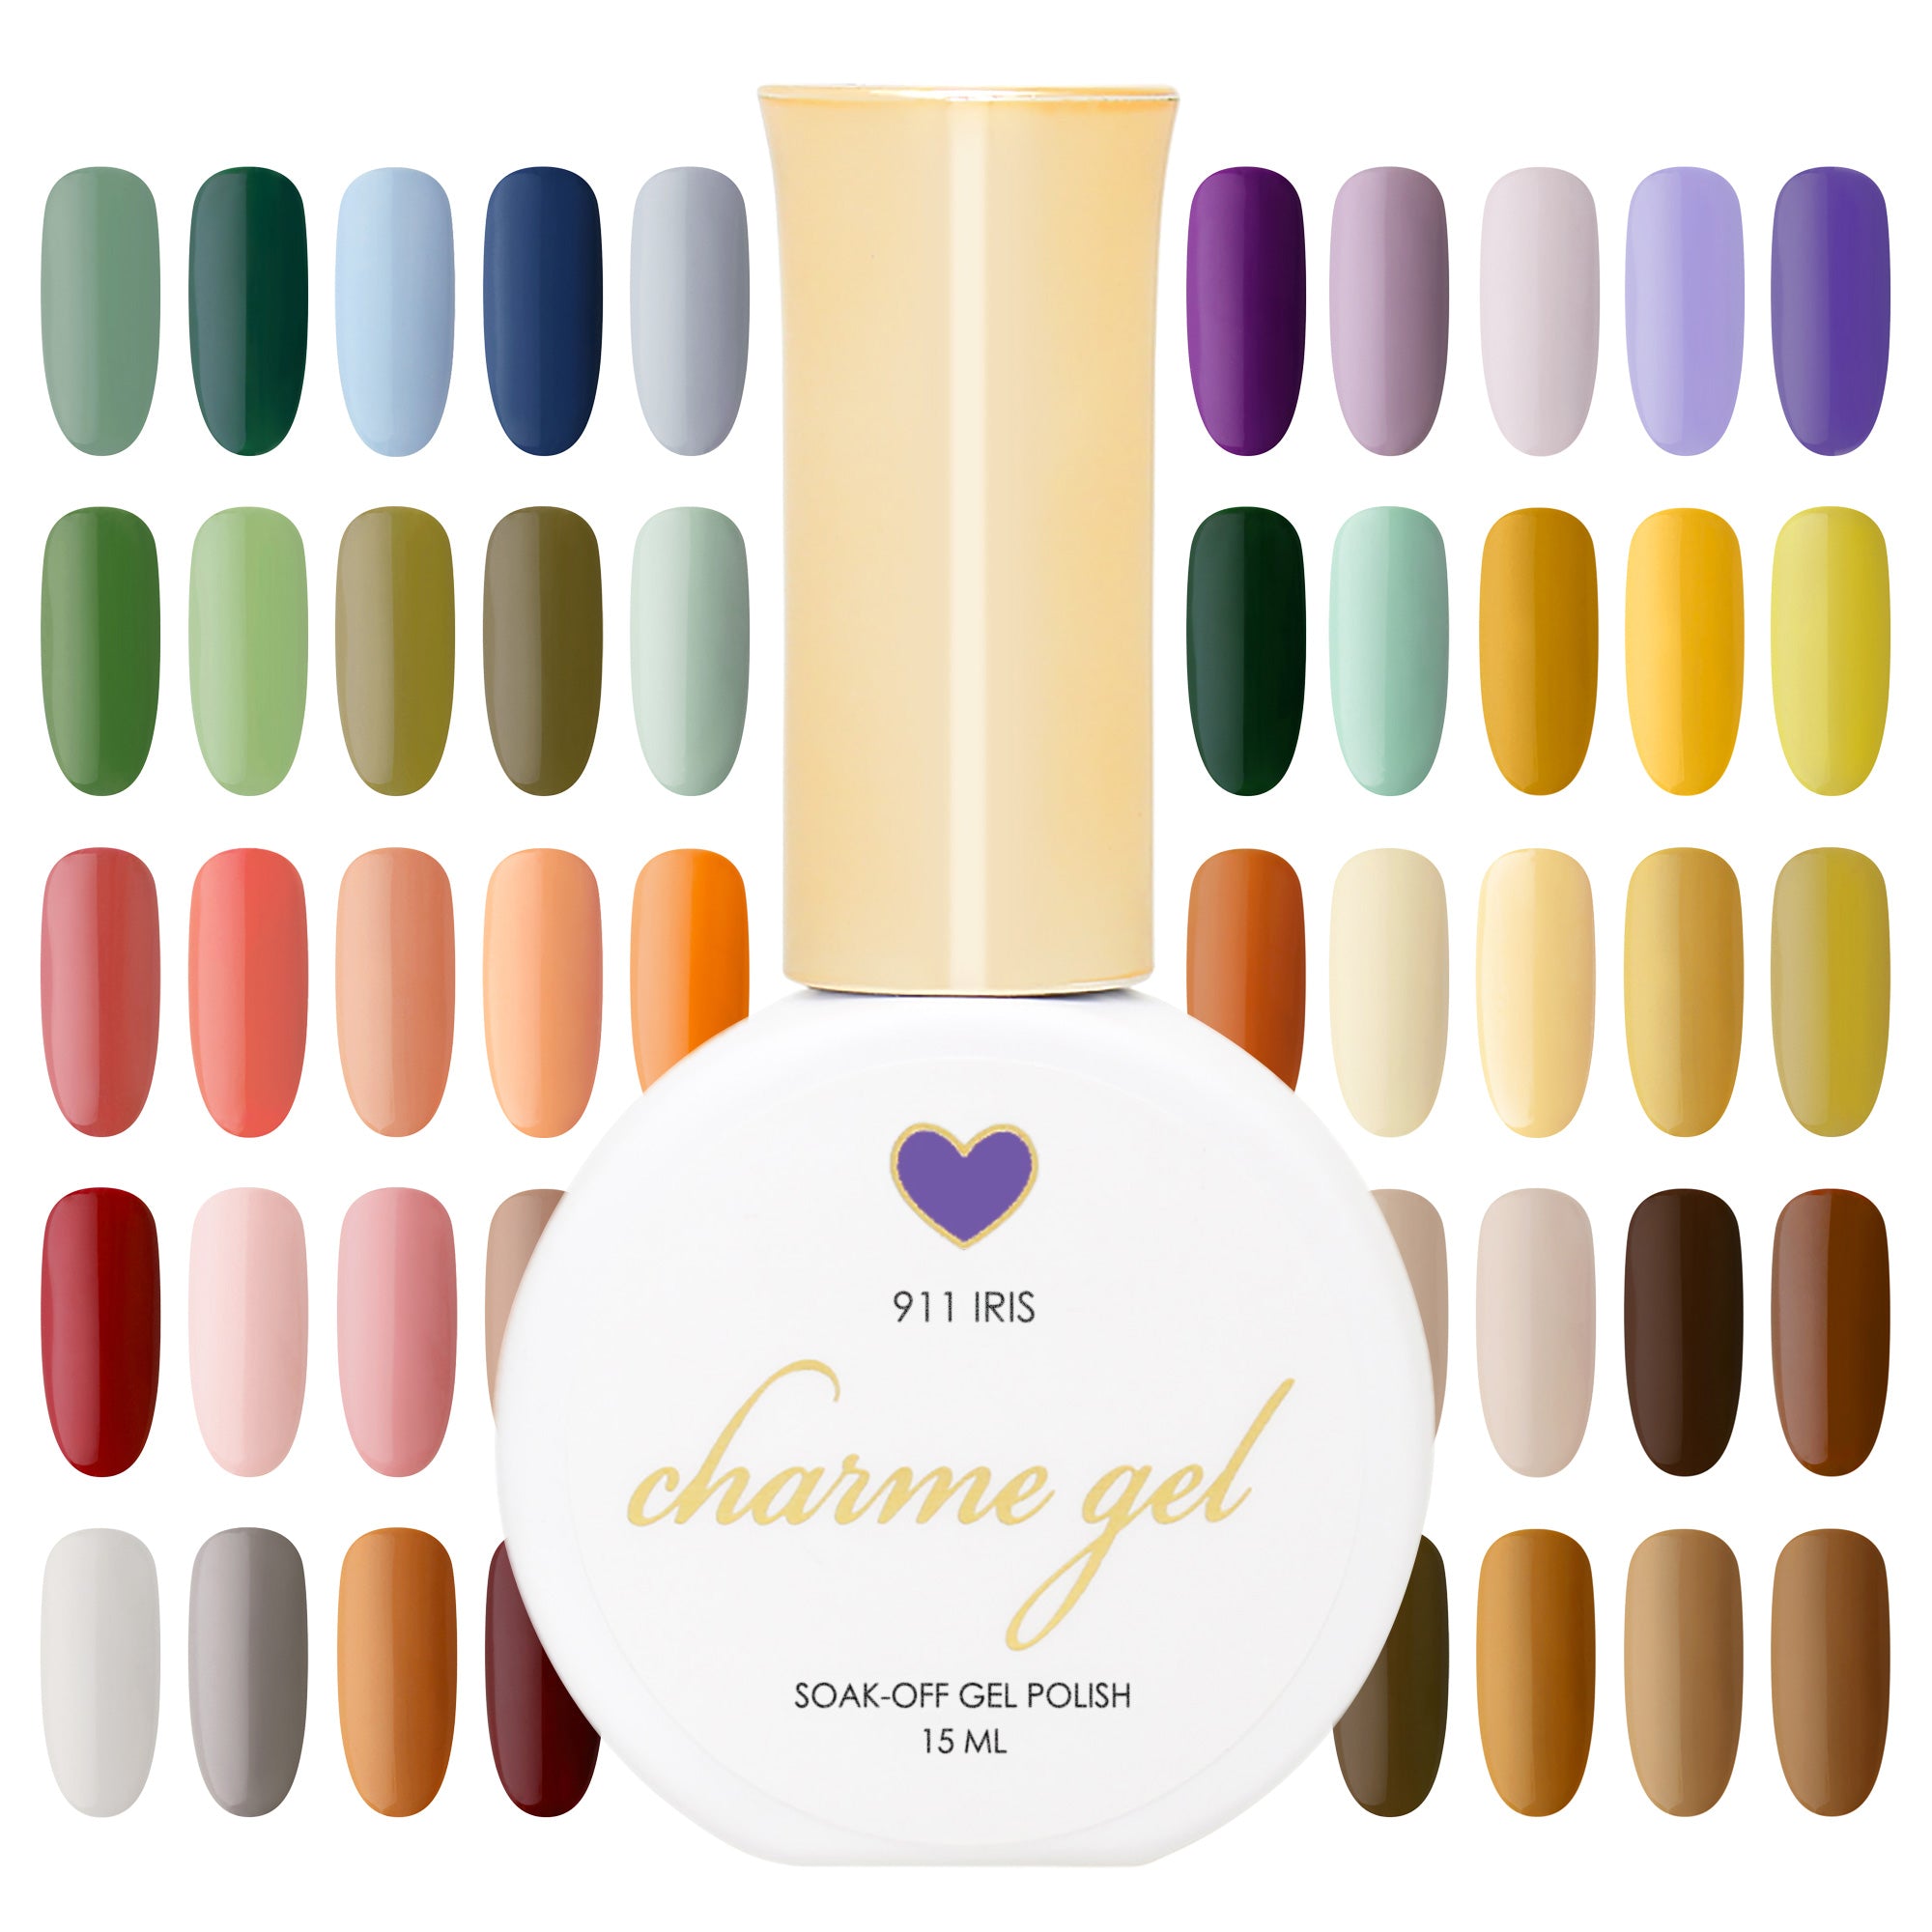 Charme Gel Second Collection / 48 Colors Earth Green Brown Purple Yellow Polish